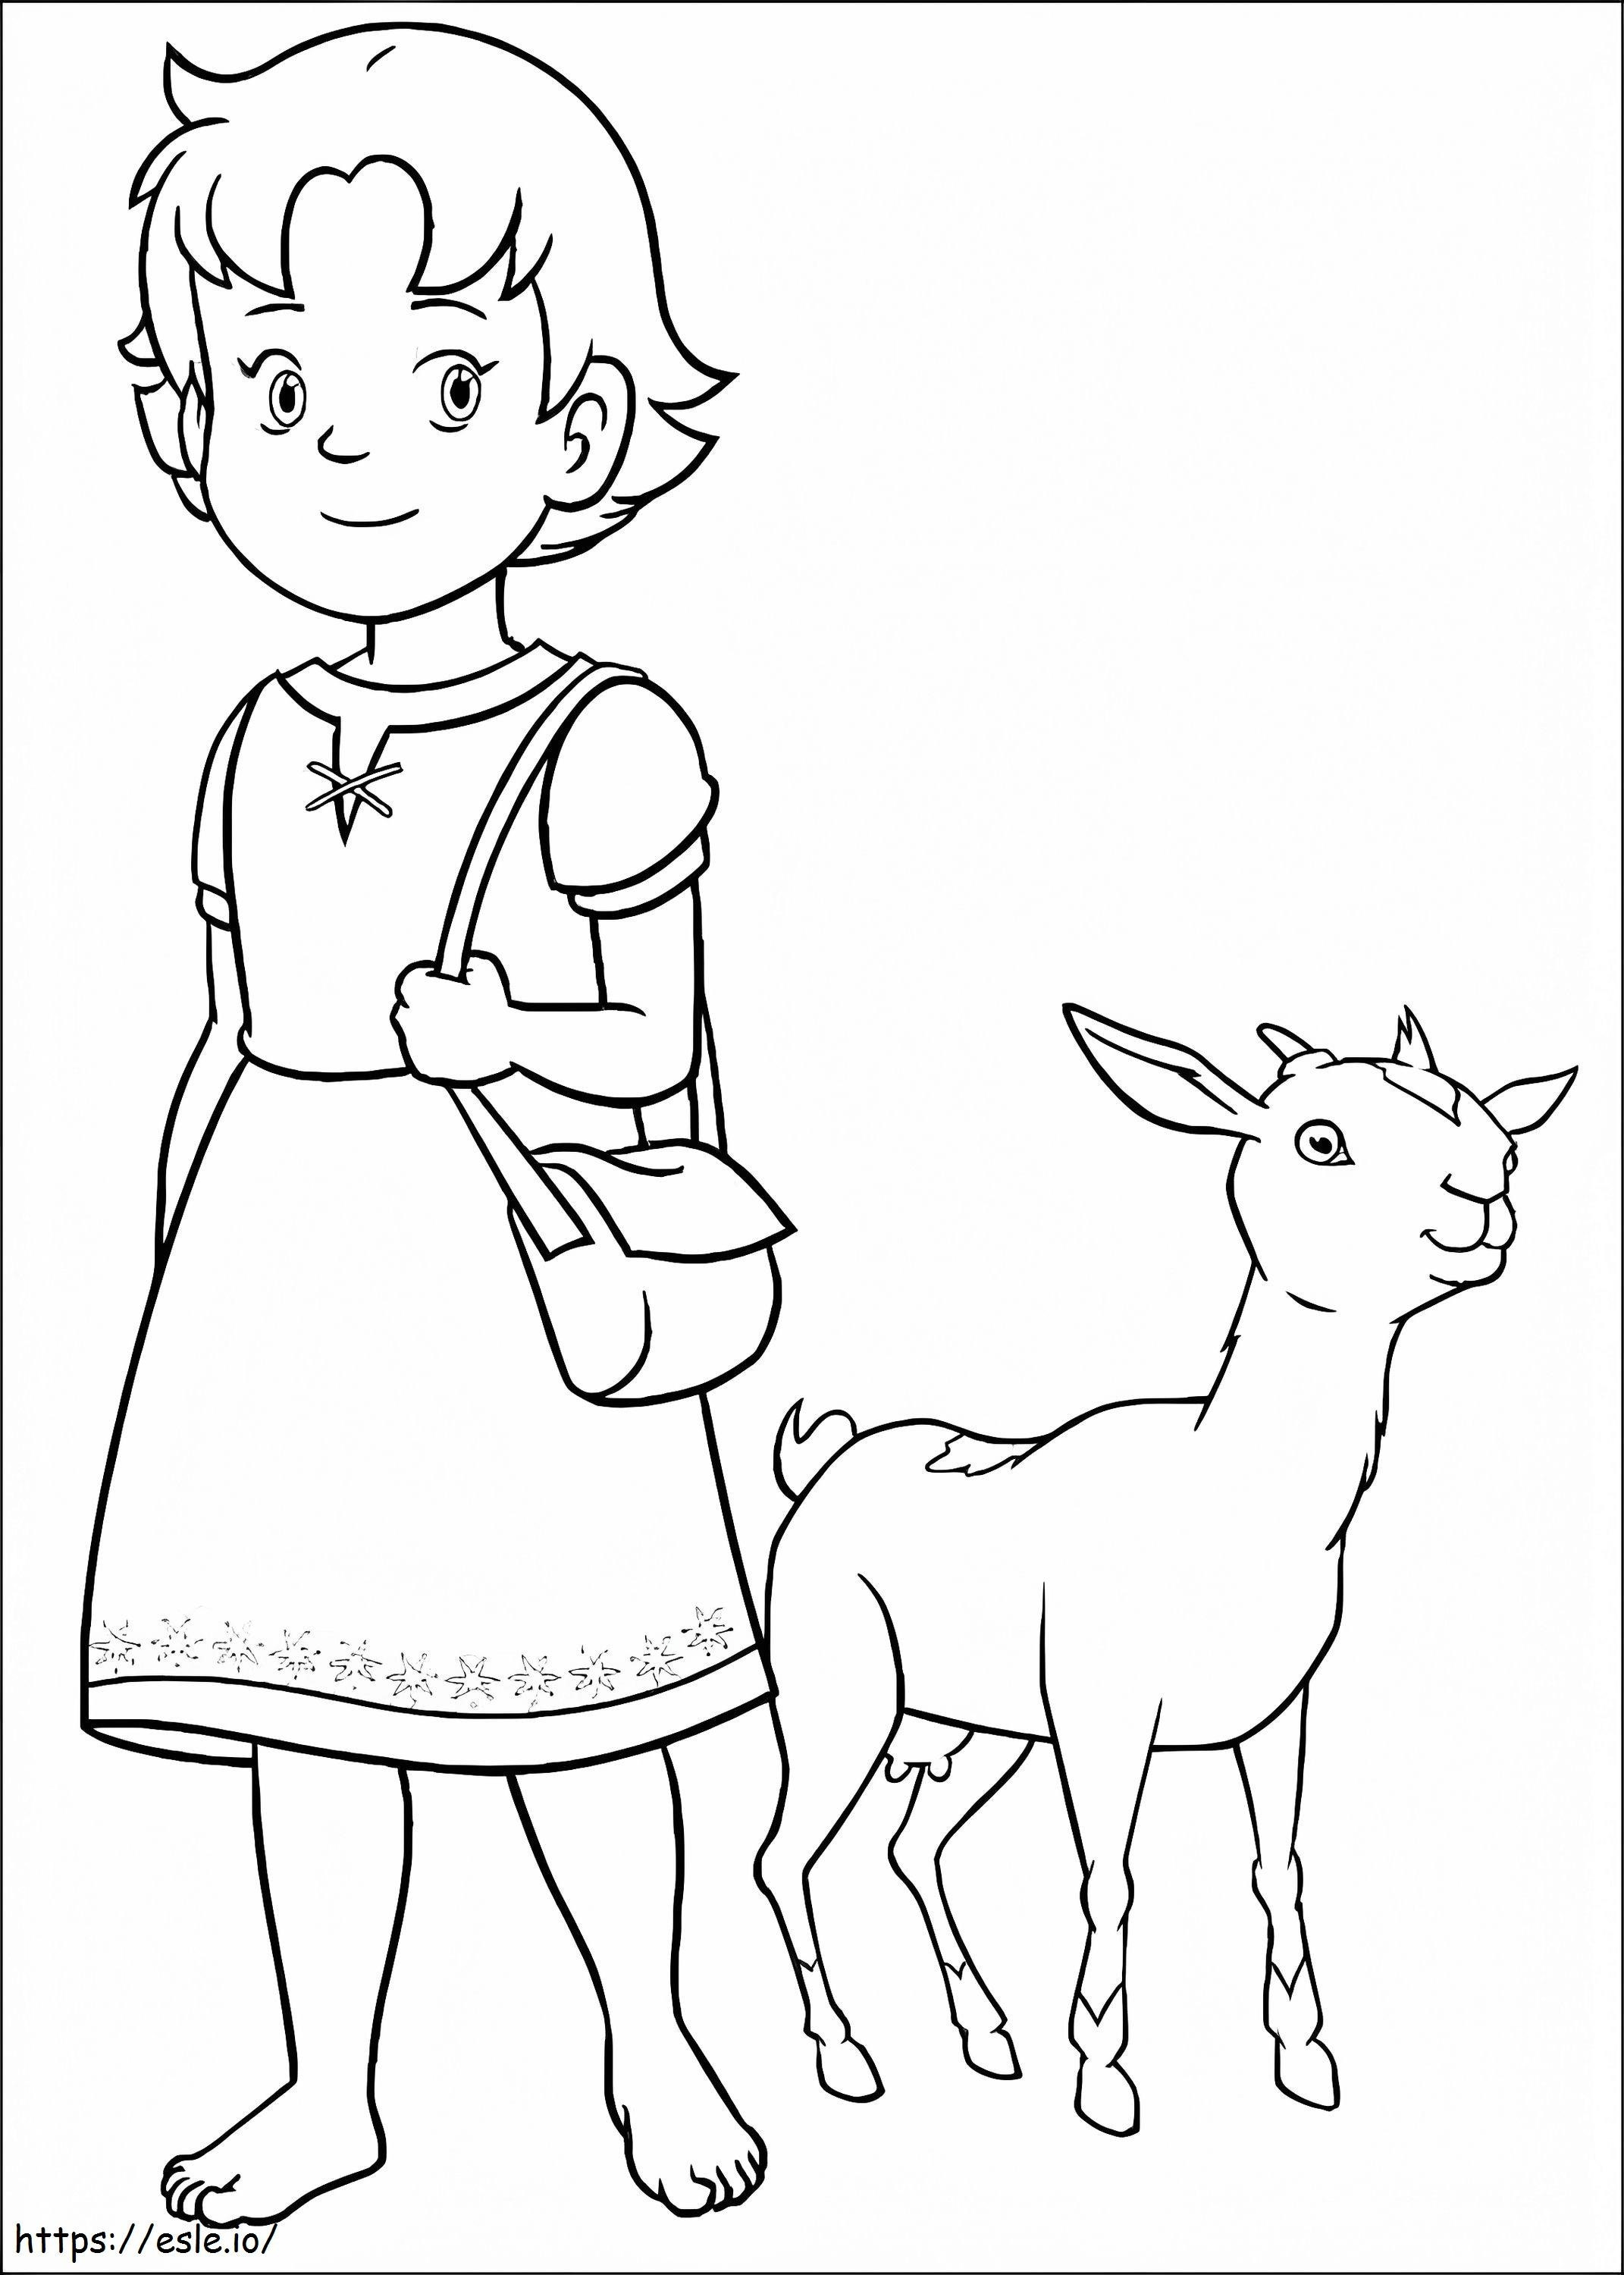 Heidi And Goat coloring page